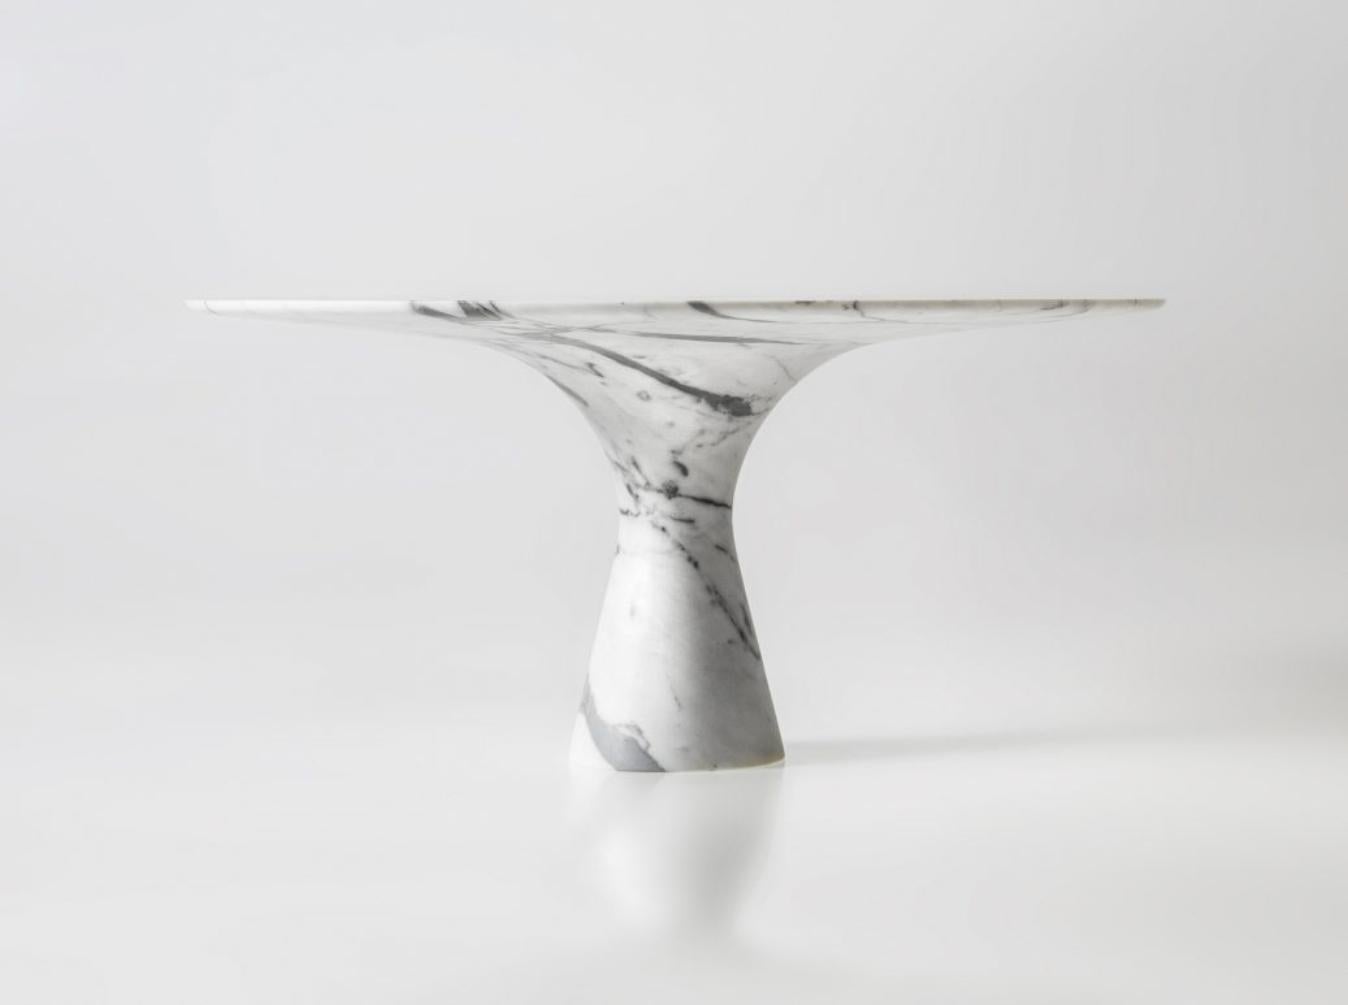 Bianco Statuarietto Refined Contemporary marble dining table 180/75
Dimensions: 180 x 75 cm
Materials: Bianco Statuarietto
Angelo is the essence of a round table in natural stone, a sculptural shape in robust material with elegant lines and